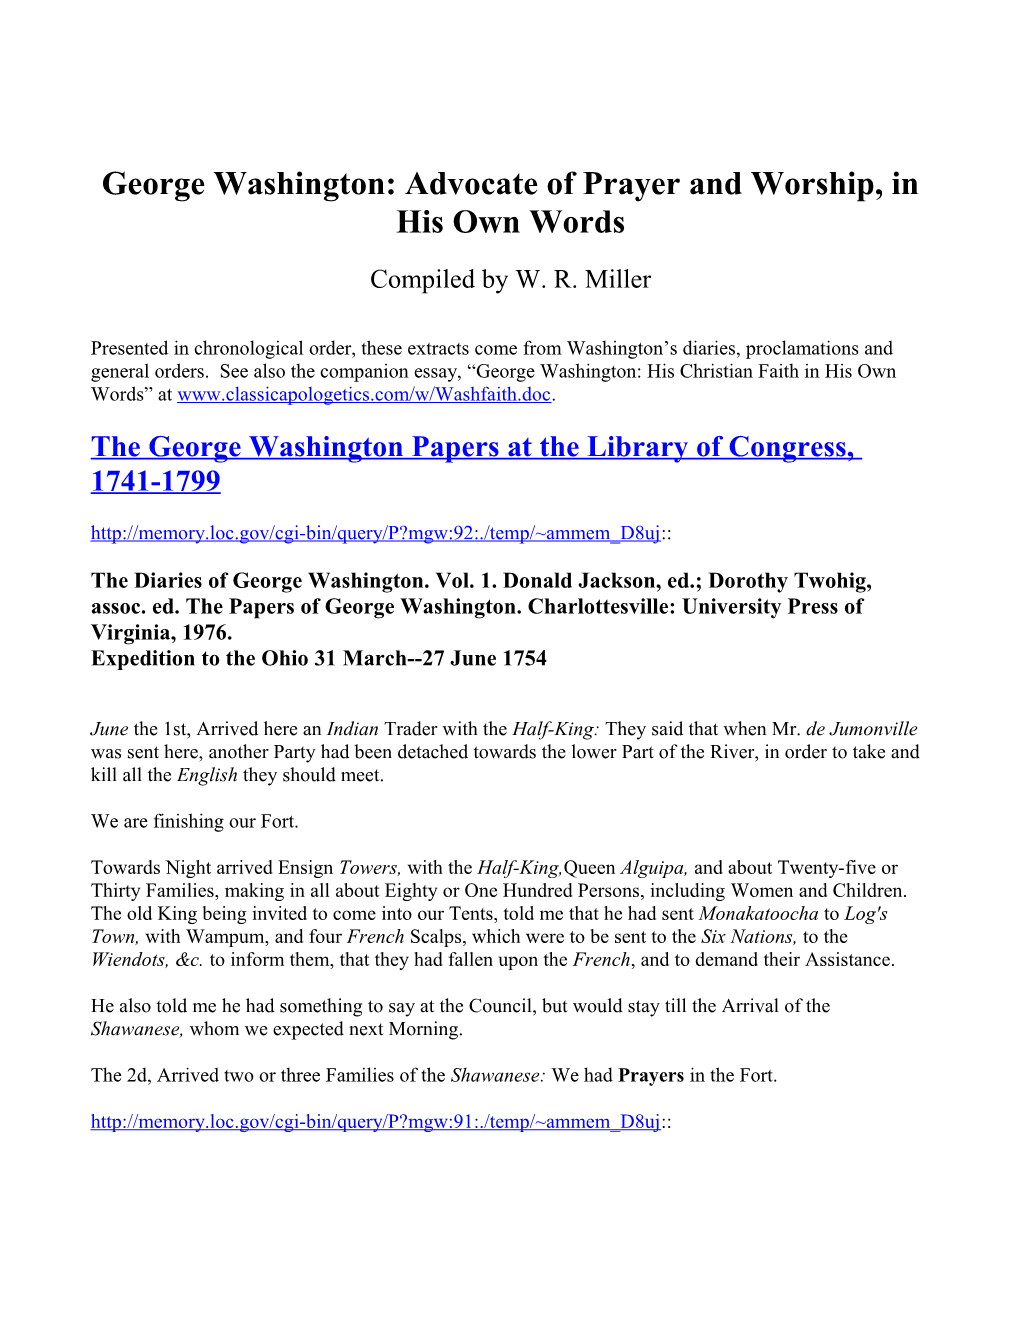 George Washington: Advocate of Prayer and Worship, in His Own Words